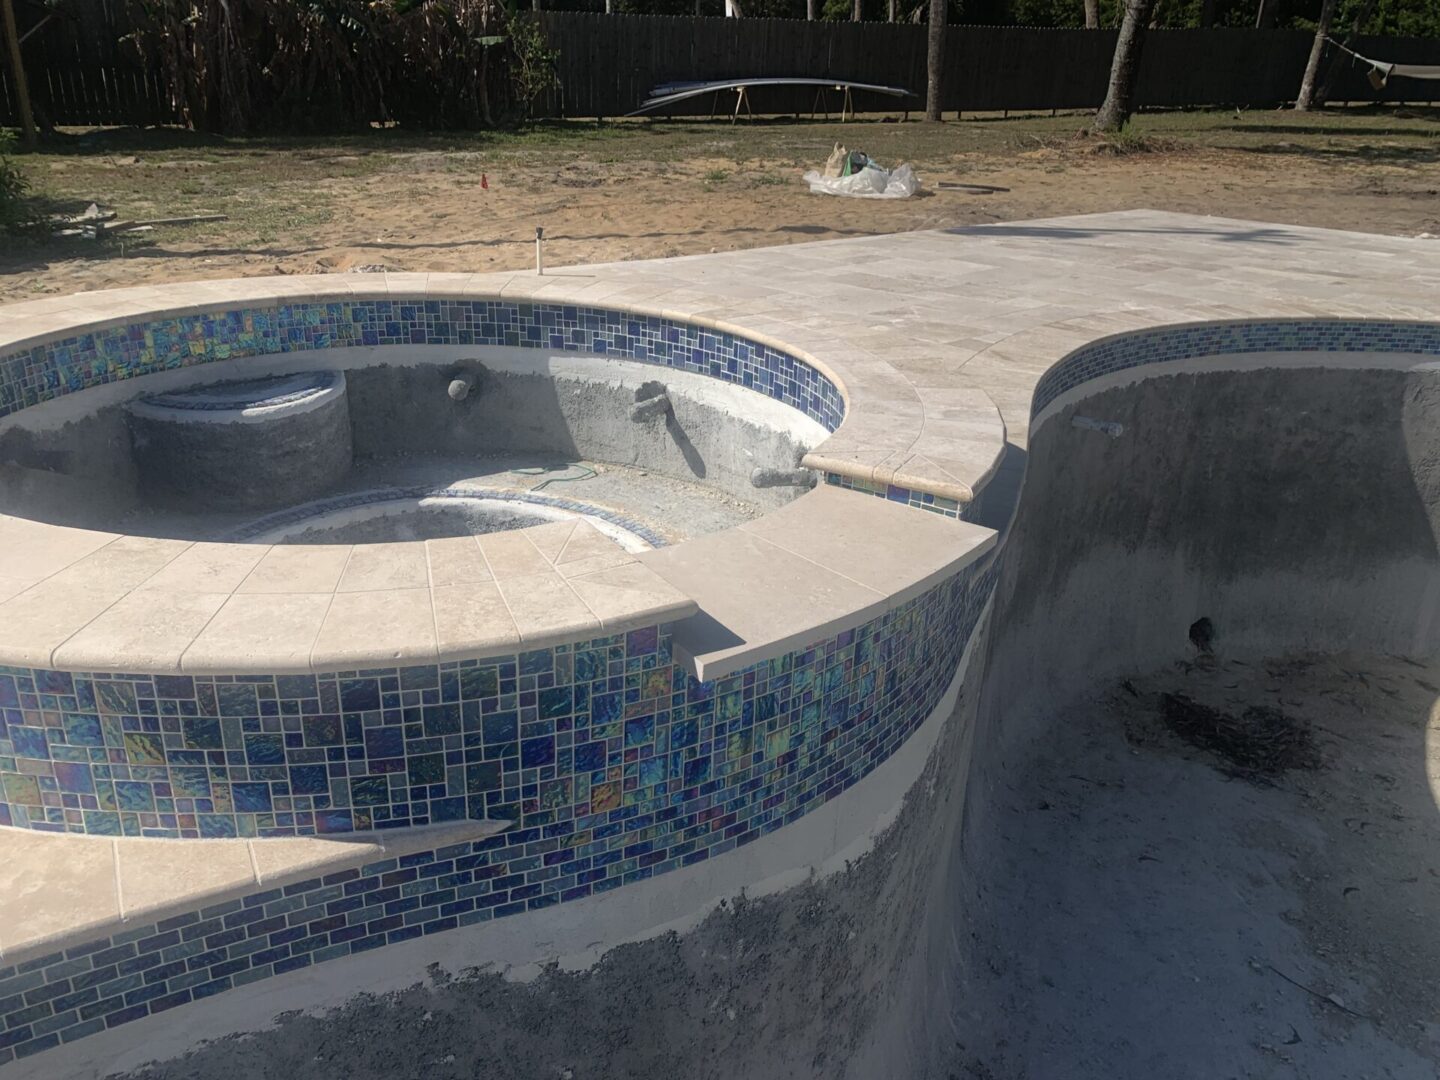 Unfinished swimming pool and hot tub with exposed concrete and a partially tiled surface in a backyard setting.